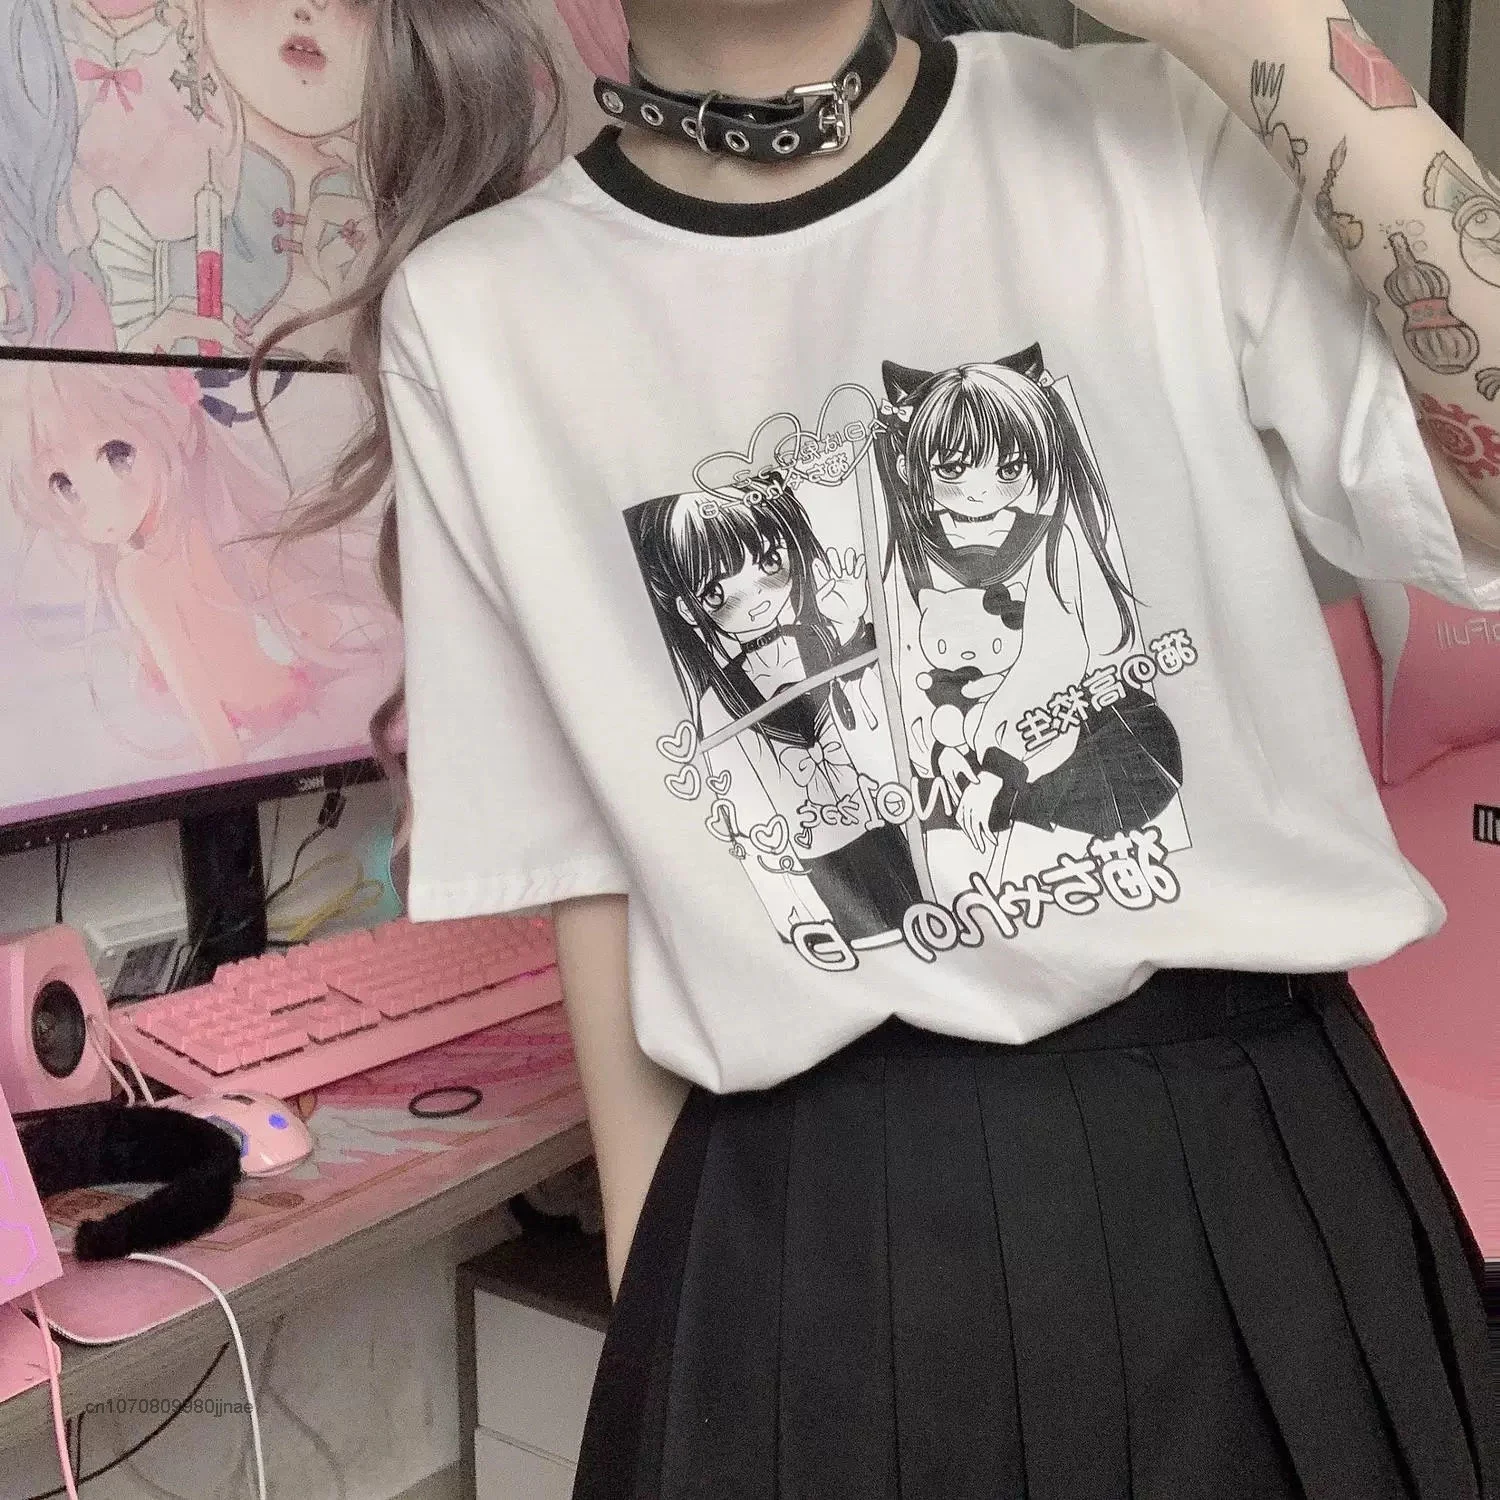 Y2k Clothes Sweet Cool Fashion Top Casual Printed Cute Japanese Girl Manga T-shirt  Kawaii Jk Gothic Style Clothes For Women